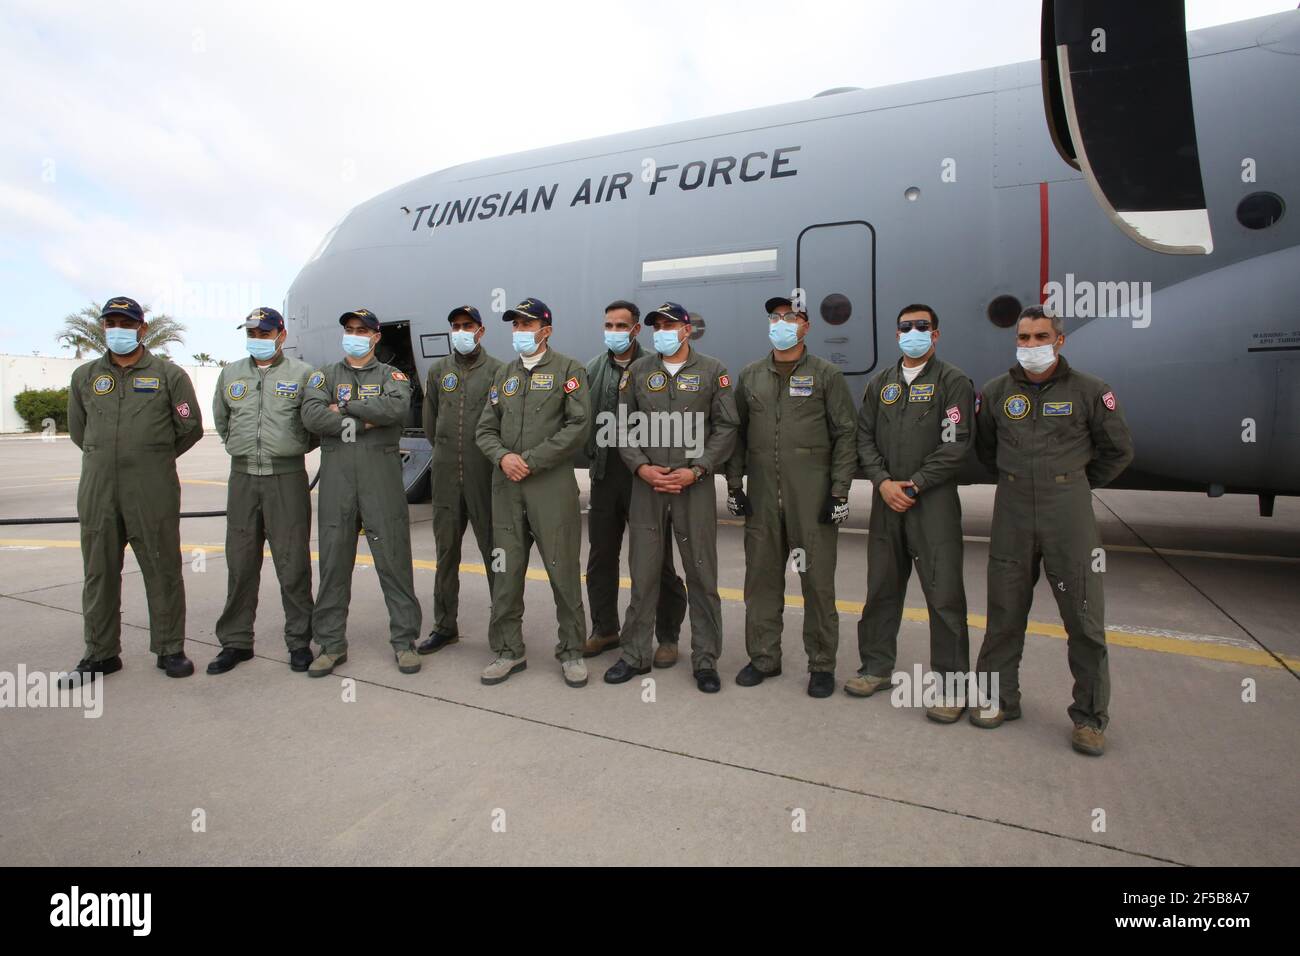 Tunis, Tunisia. March 25 2021: The Tunisian Air Force team seen during the ceremonyTunis Carthage International Airport, under the supervision of the Minister of Health, Dr. Fawzi Mahdi, and the Chinese Ambassador to Tunisia, Mr. ZHANG Jianguo, and in the presence of the Emir of the Major General, Doctor General of Military Health, Mr. Mustafa Ferjani, a convoy received a new shipment of anti-Covid 19 vaccine containing 200 thousand doses of Sinovac vaccine provided by the People's Republic of China as a gift to the Republic of Tunisia, as part of the health cooperation between the two countri Stock Photo